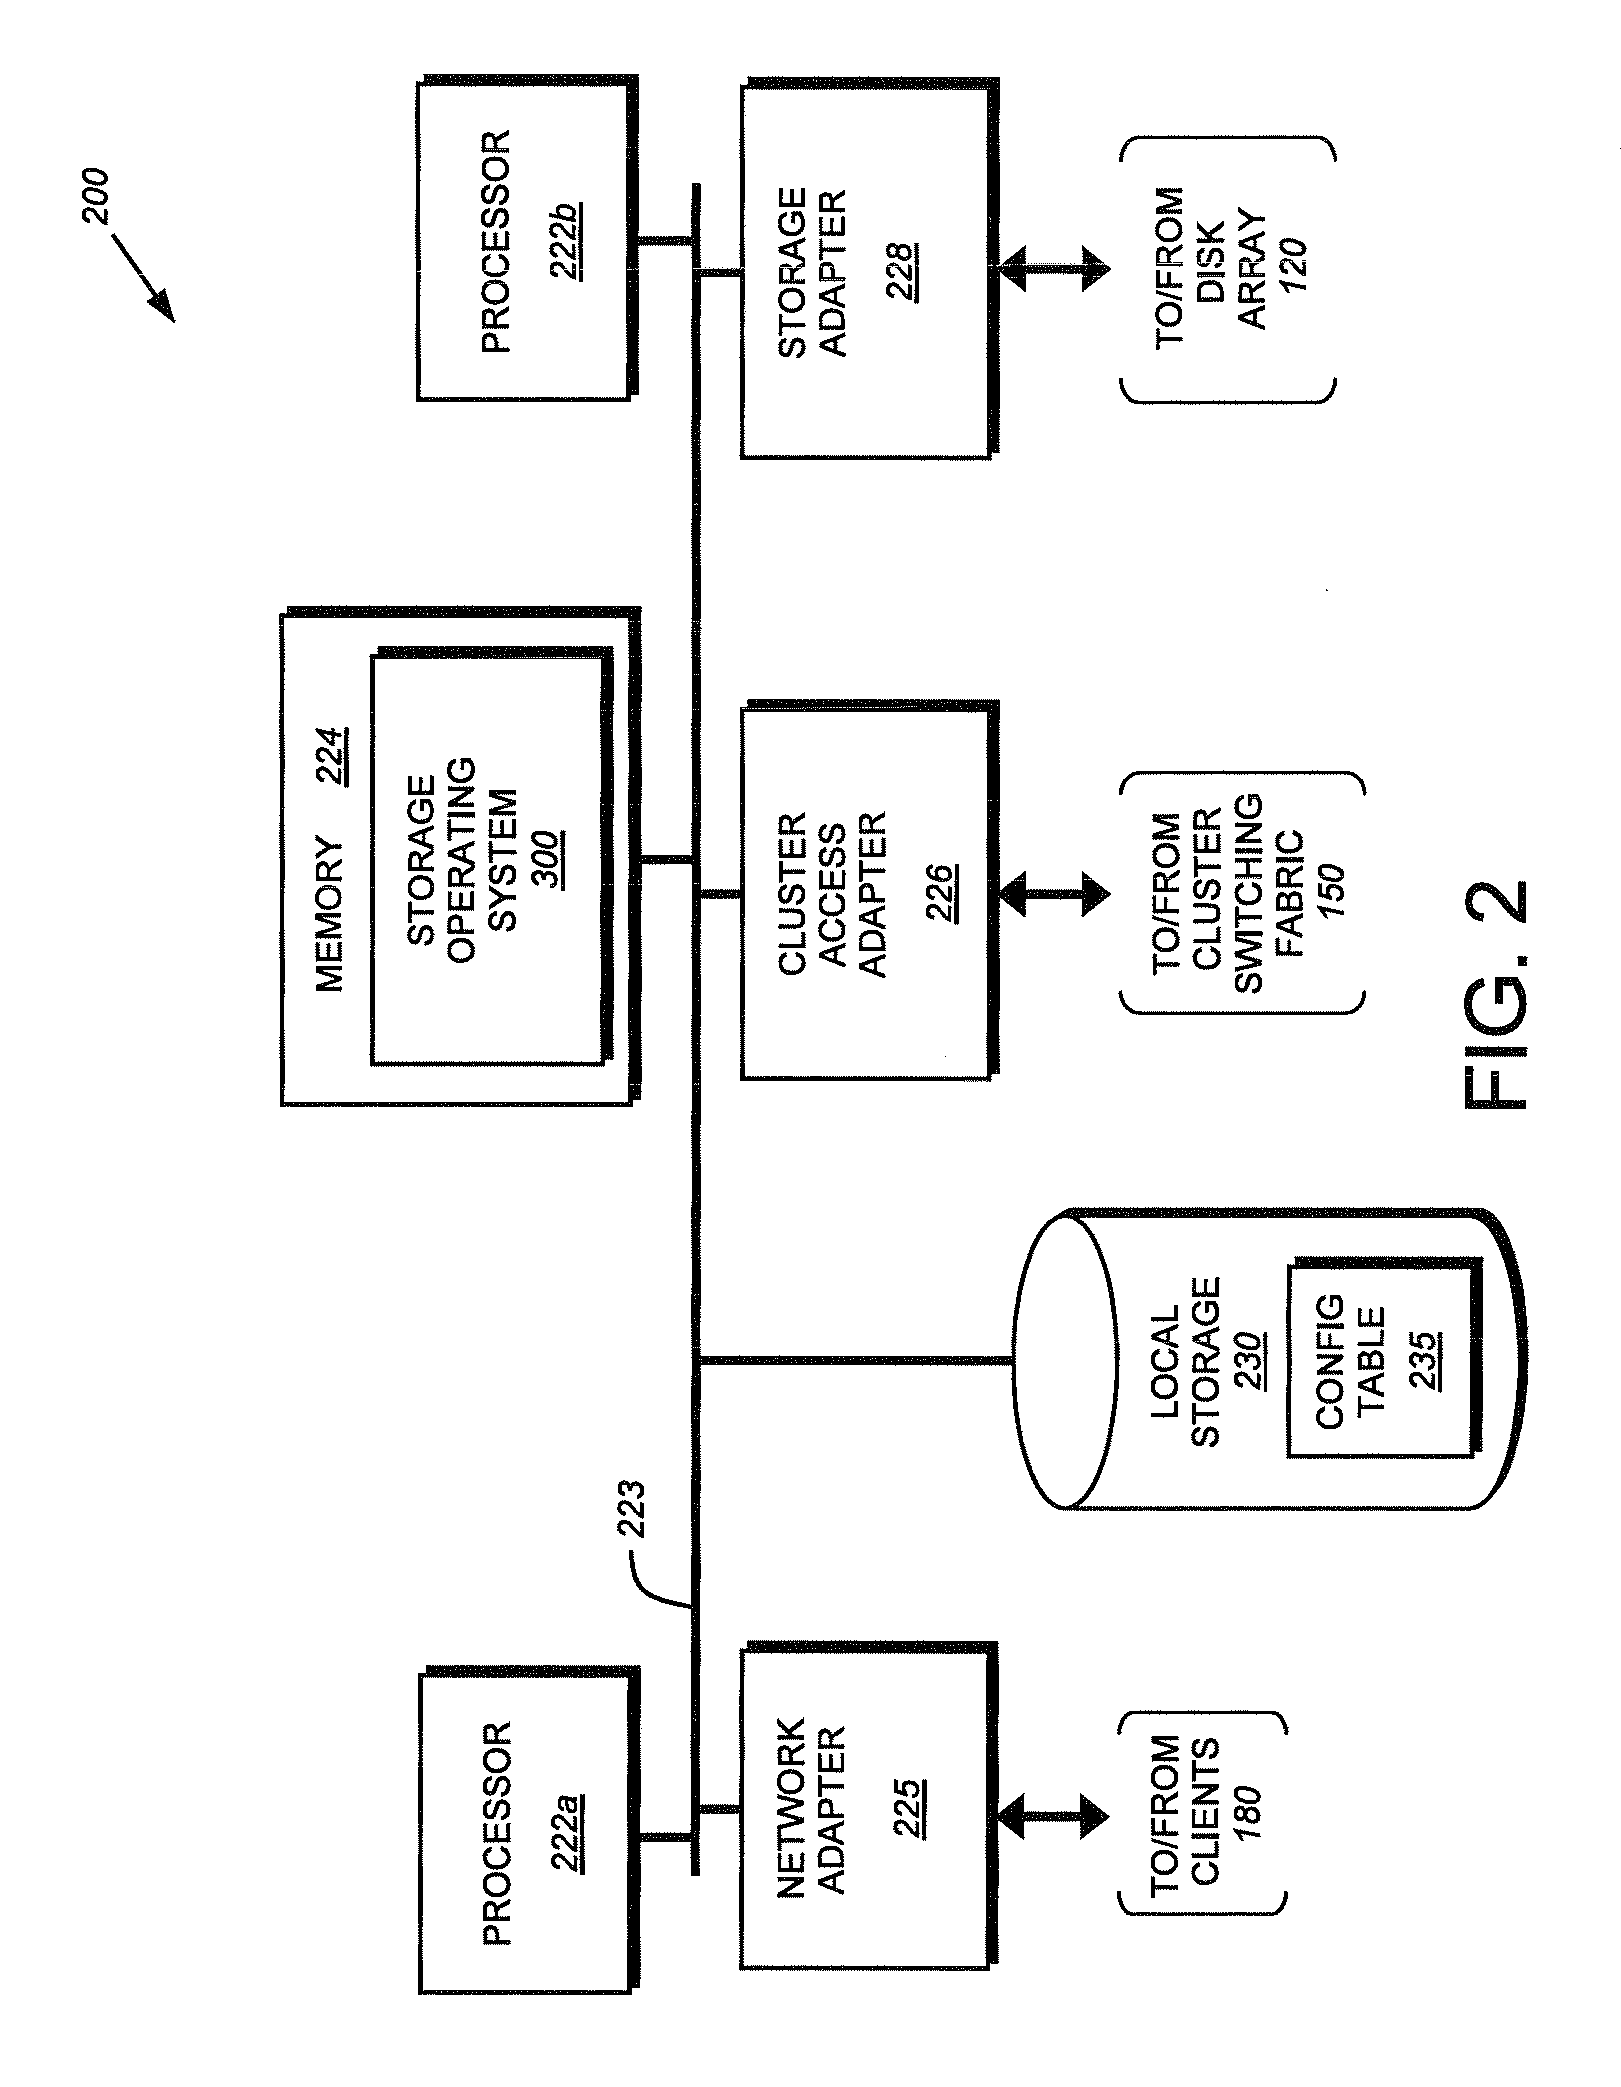 System and method for performing distributed consistency verification of a clustered file system